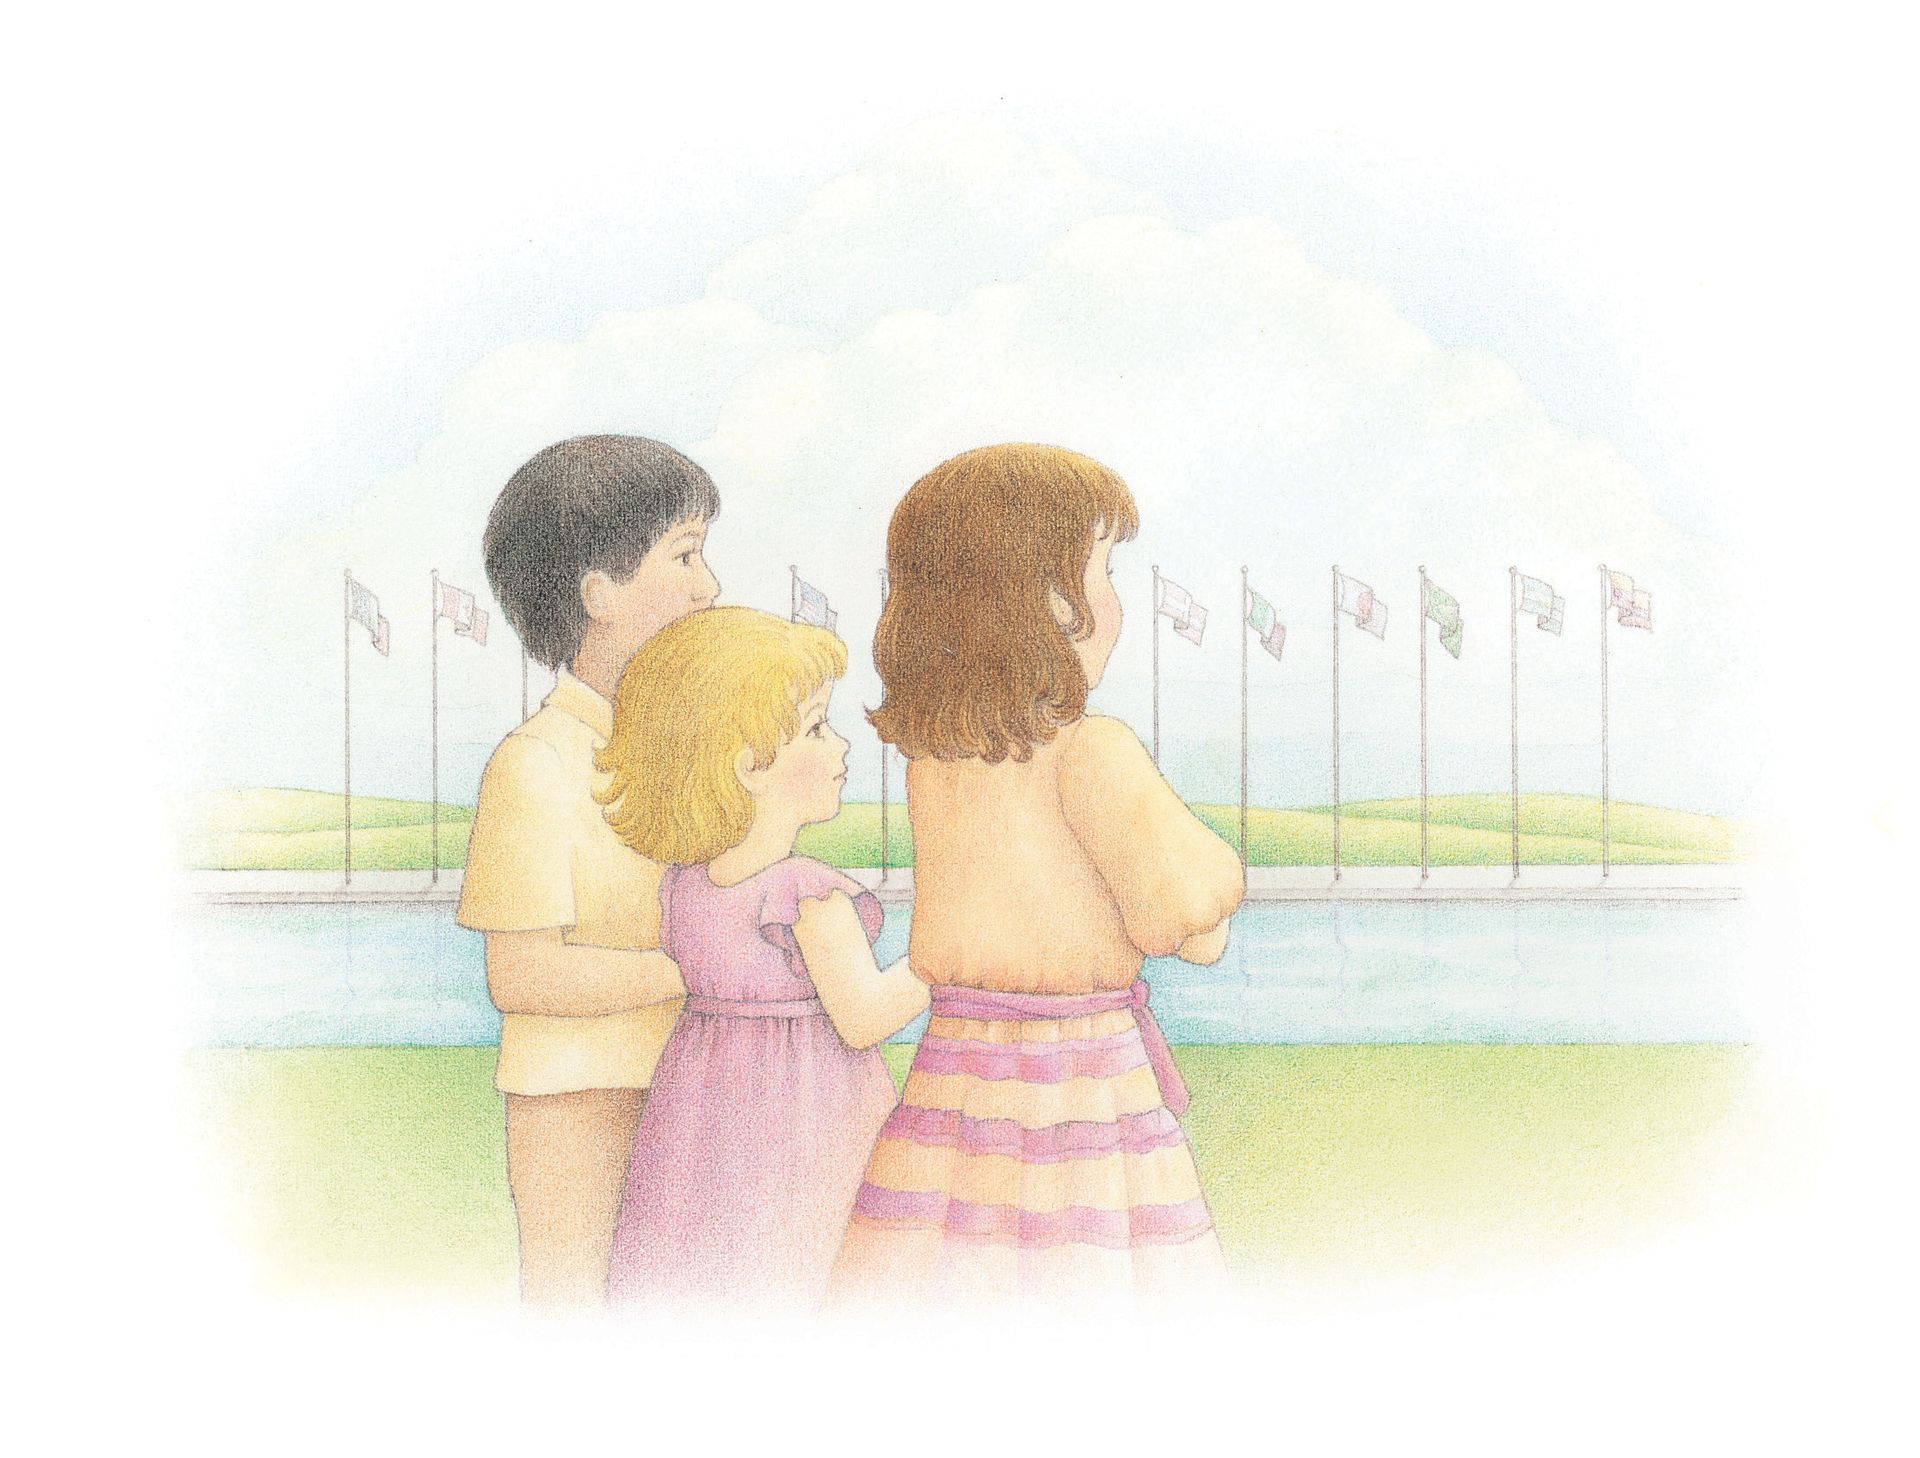 Three children standing together, looking at a row of flags. From the Children’s Songbook, page 131, “The Twelfth Article of Faith”; watercolor illustration by Beth Whittaker.